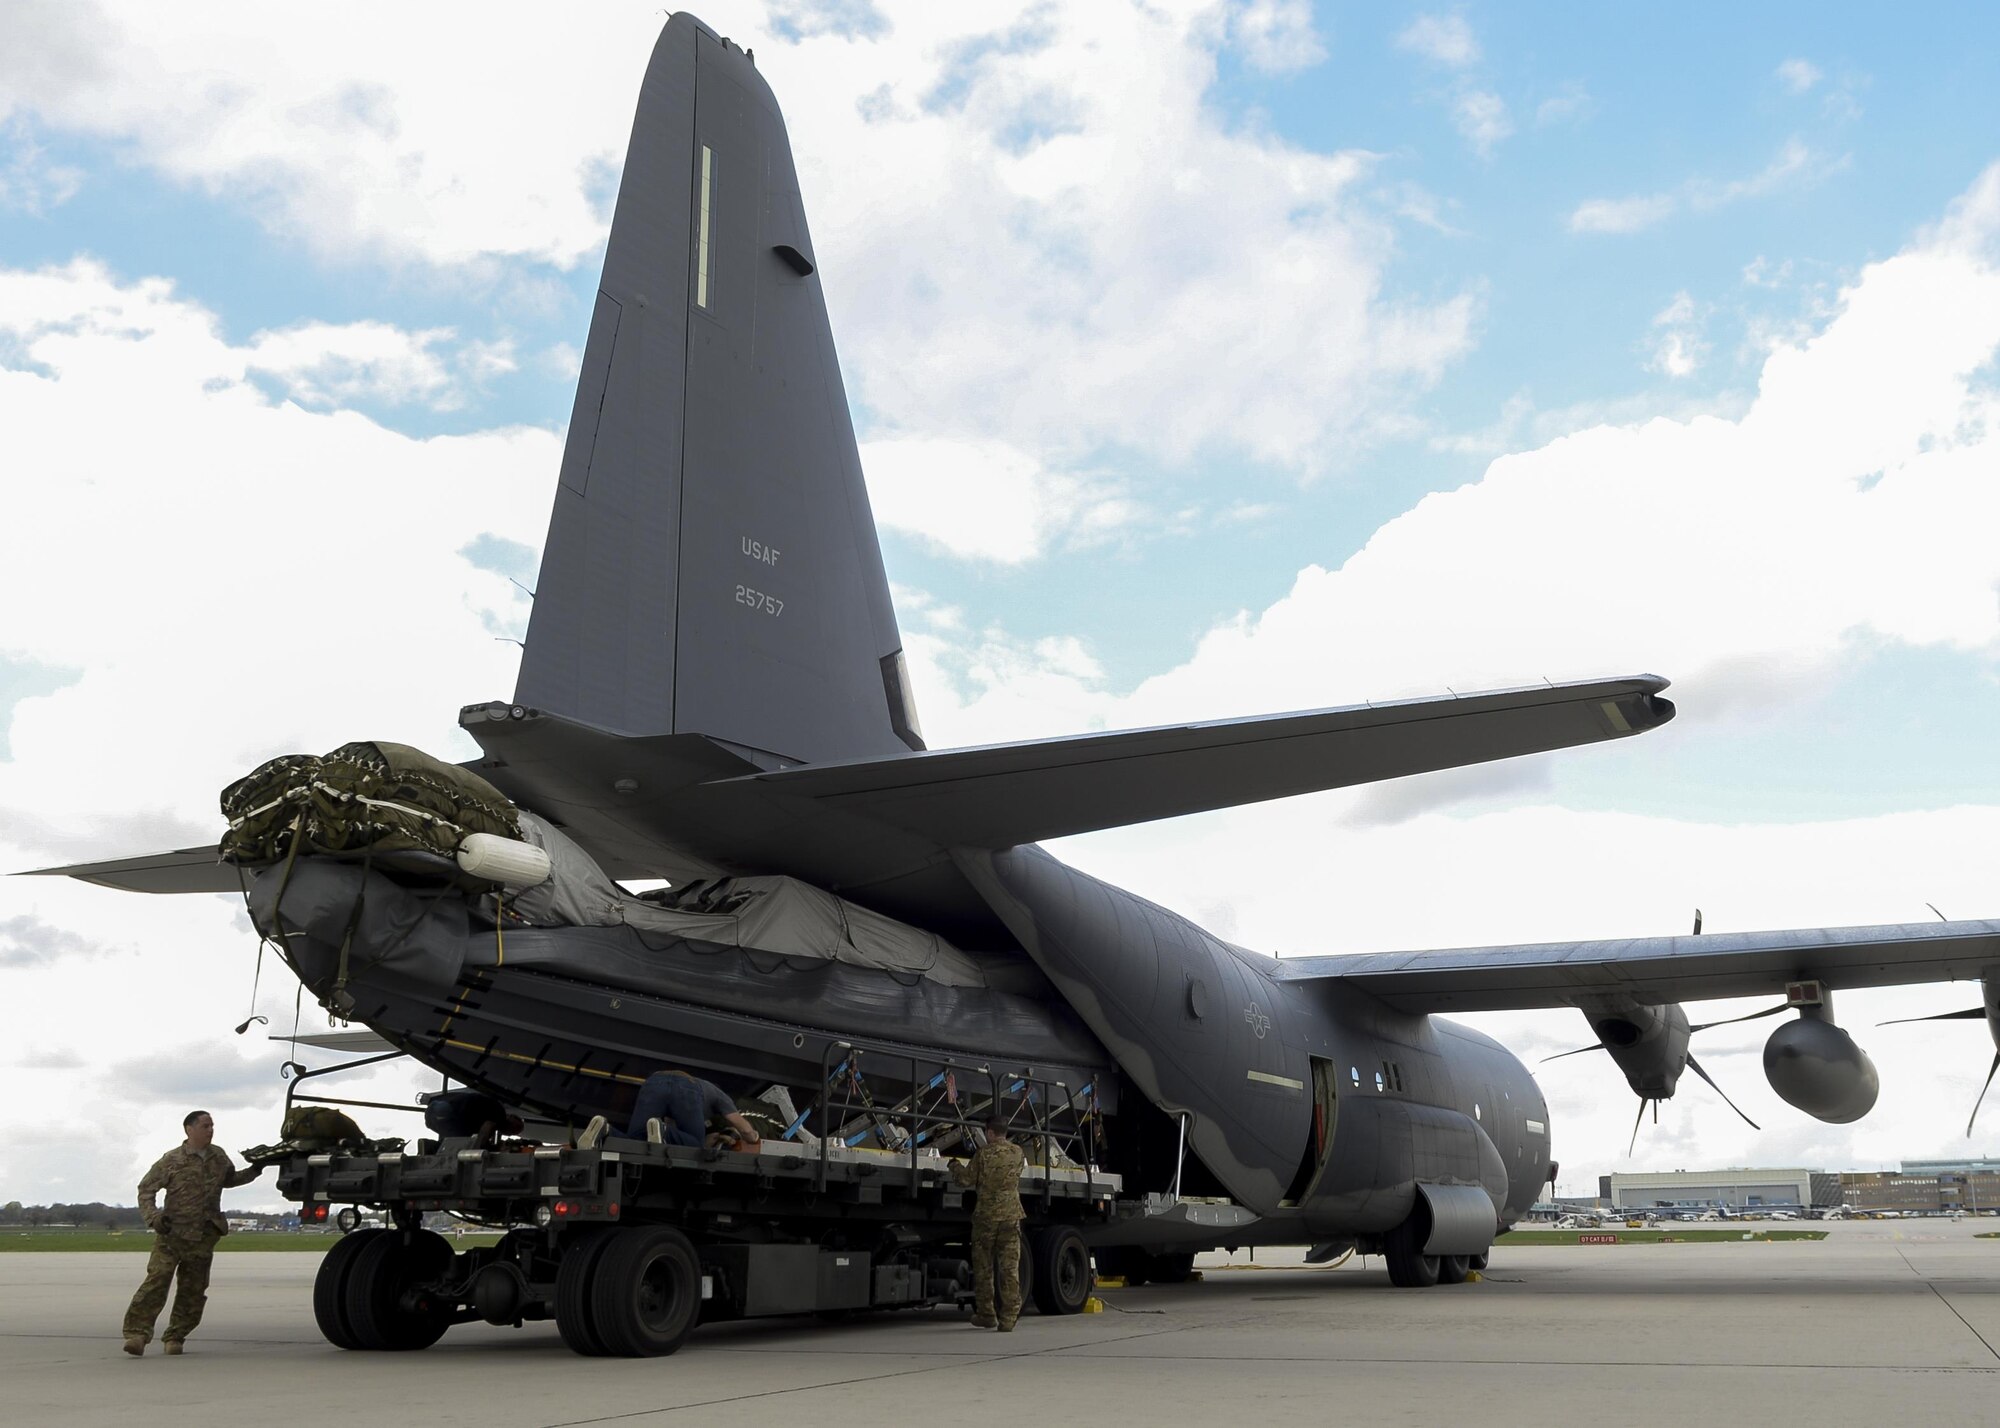 A Rigid Inflatable Boat is loaded into an MC-130J Commando II assigned to the 67th Special Operations Squadron during an exercise April 14, 2016, at Stuttgart Air Base, Germany. The preparations were made in order to conduct an airdrop mission with a U.S. Navy Maritime Craft Aerial Delivery System. (U.S. Air Force photo by Senior Airman Victoria H. Taylor/Released)